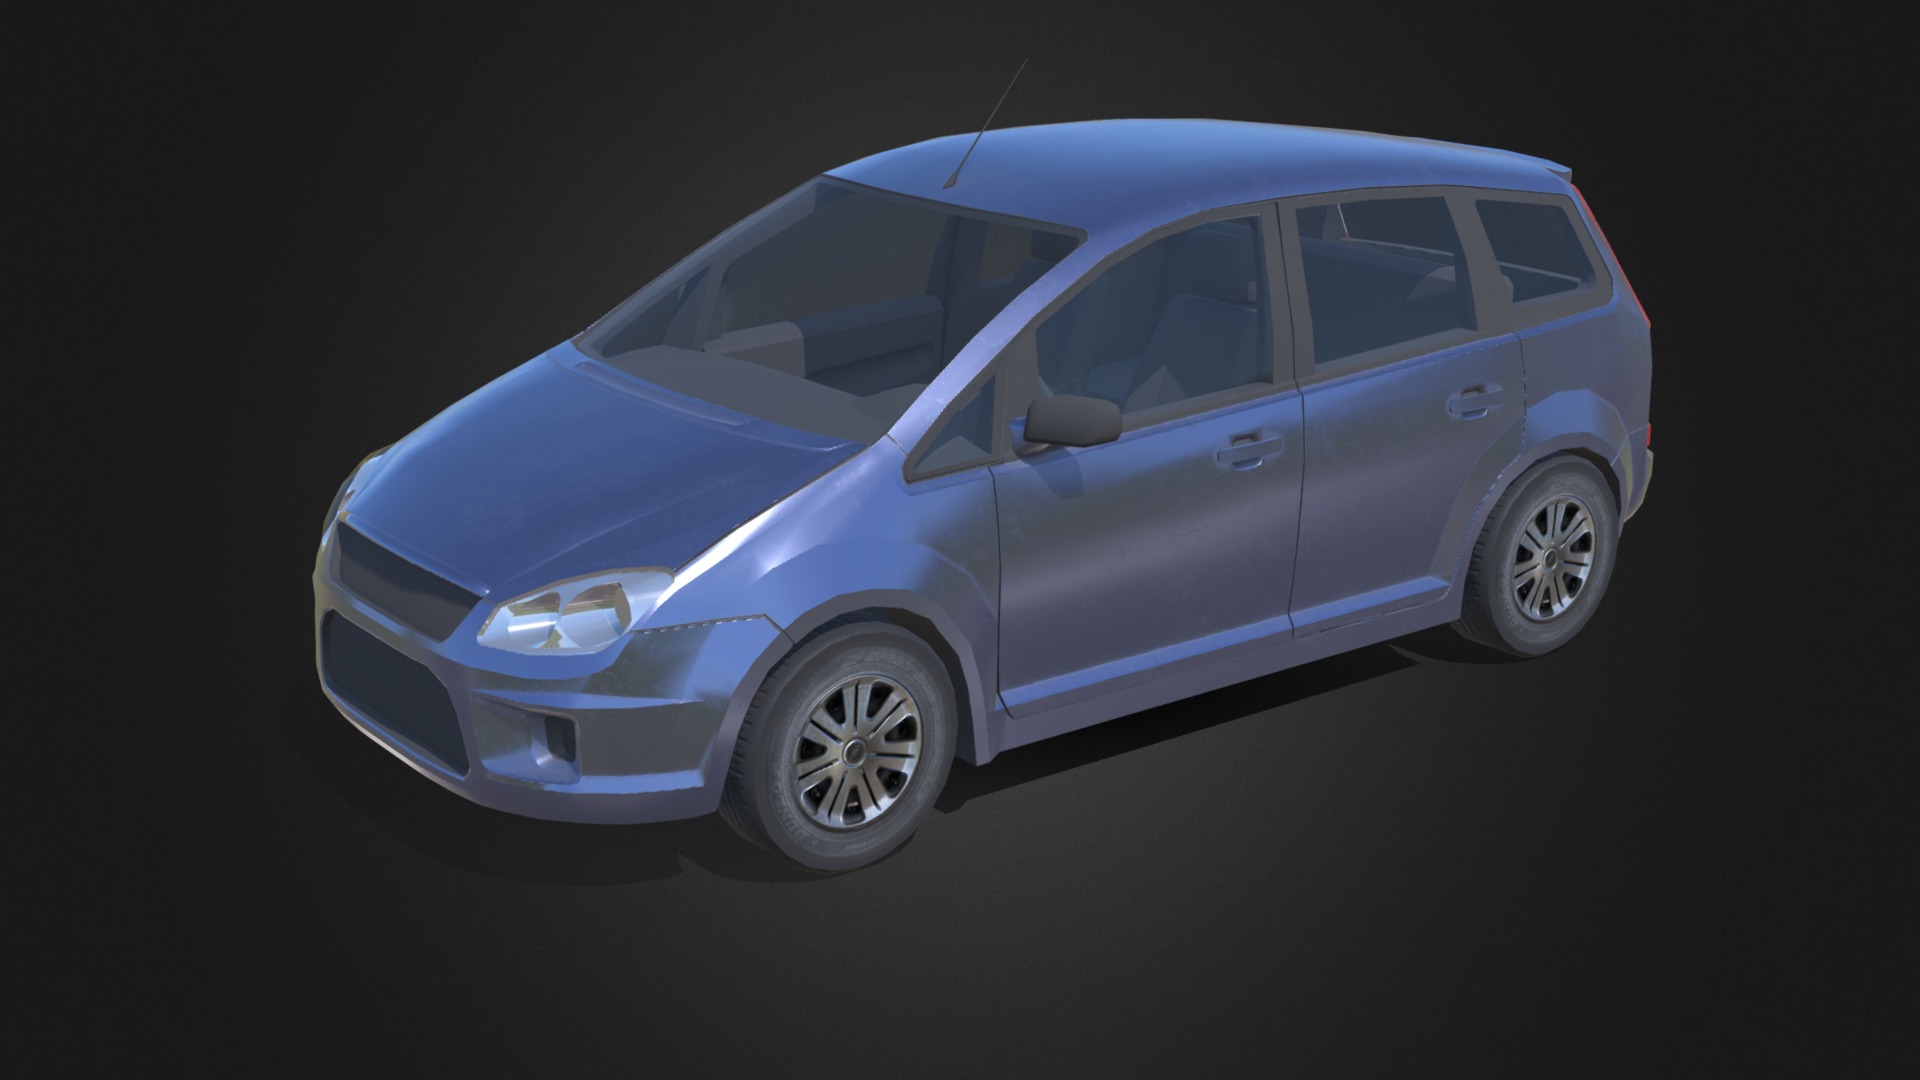 3D model Car 4 - This is a 3D model of the Car 4. The 3D model is about a small white car.